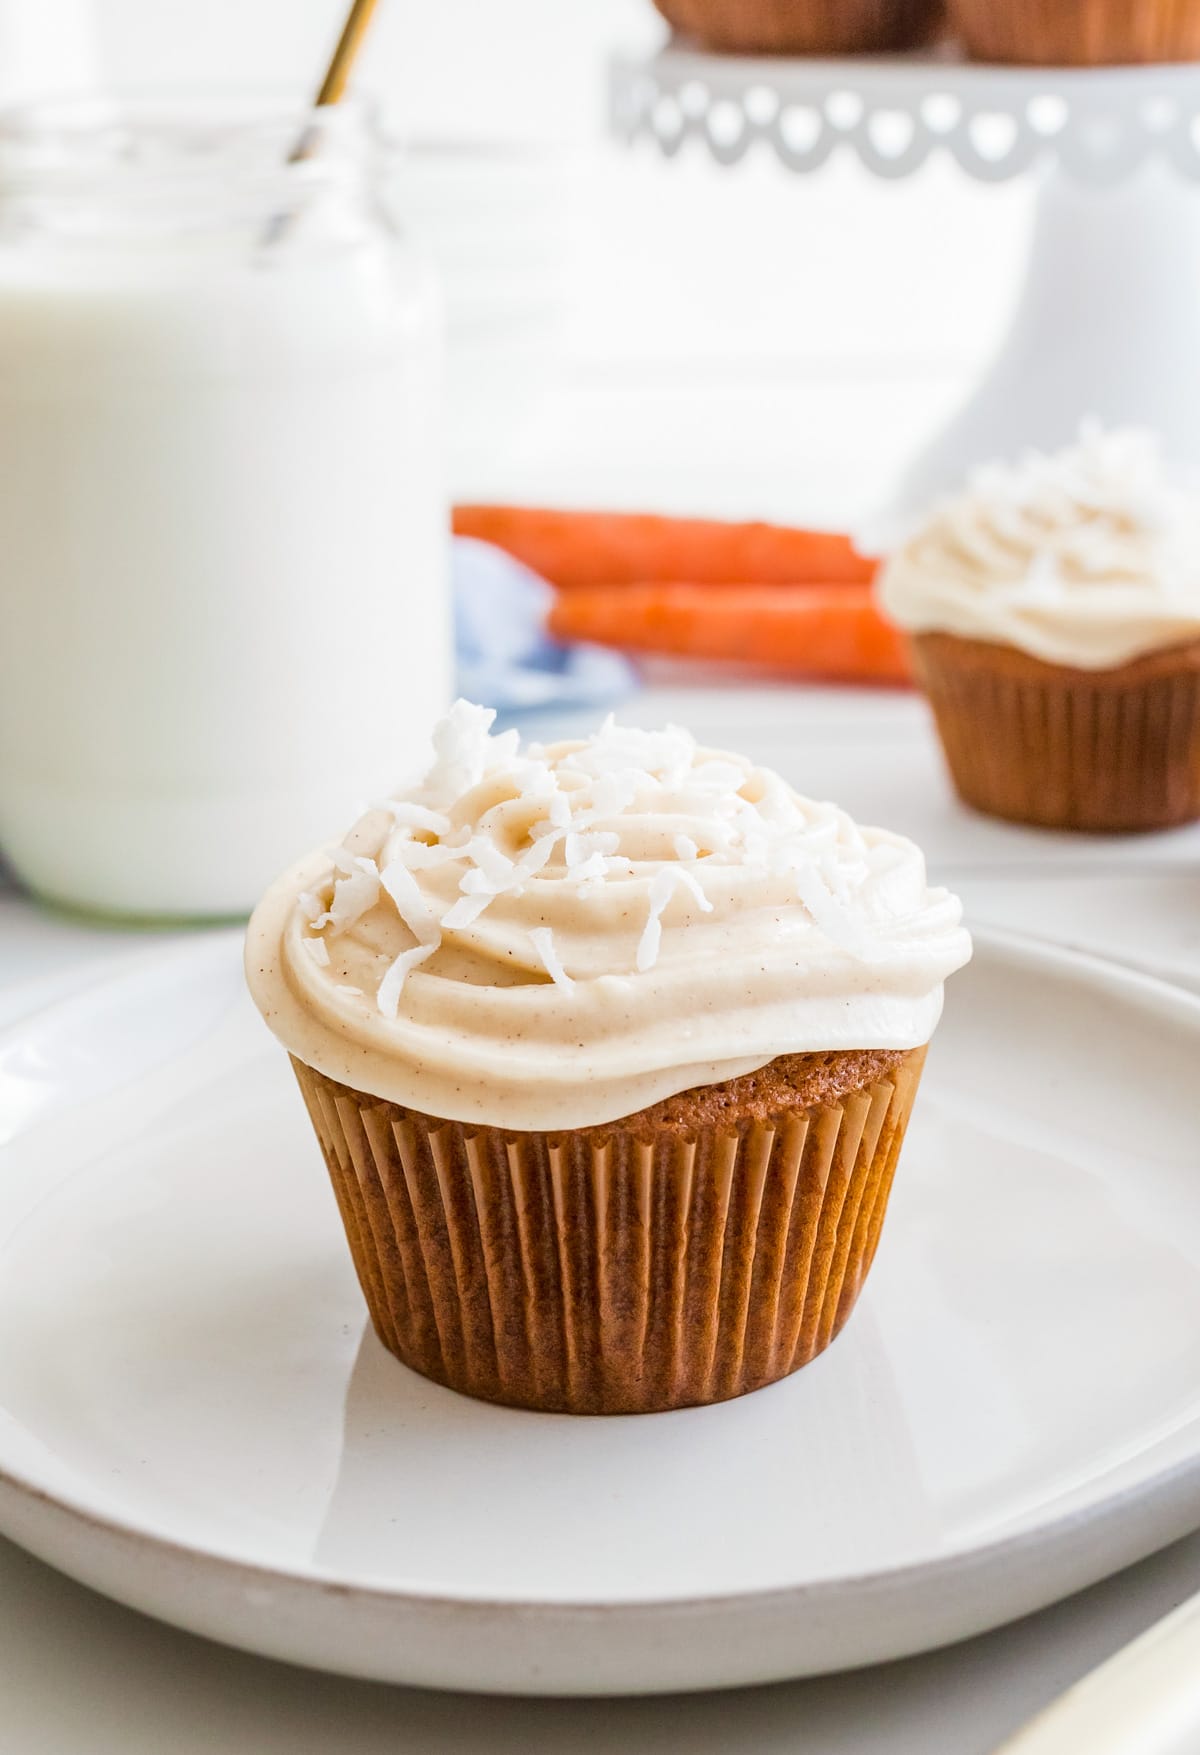 One cupcake on white plate with milk and carrots in the background.